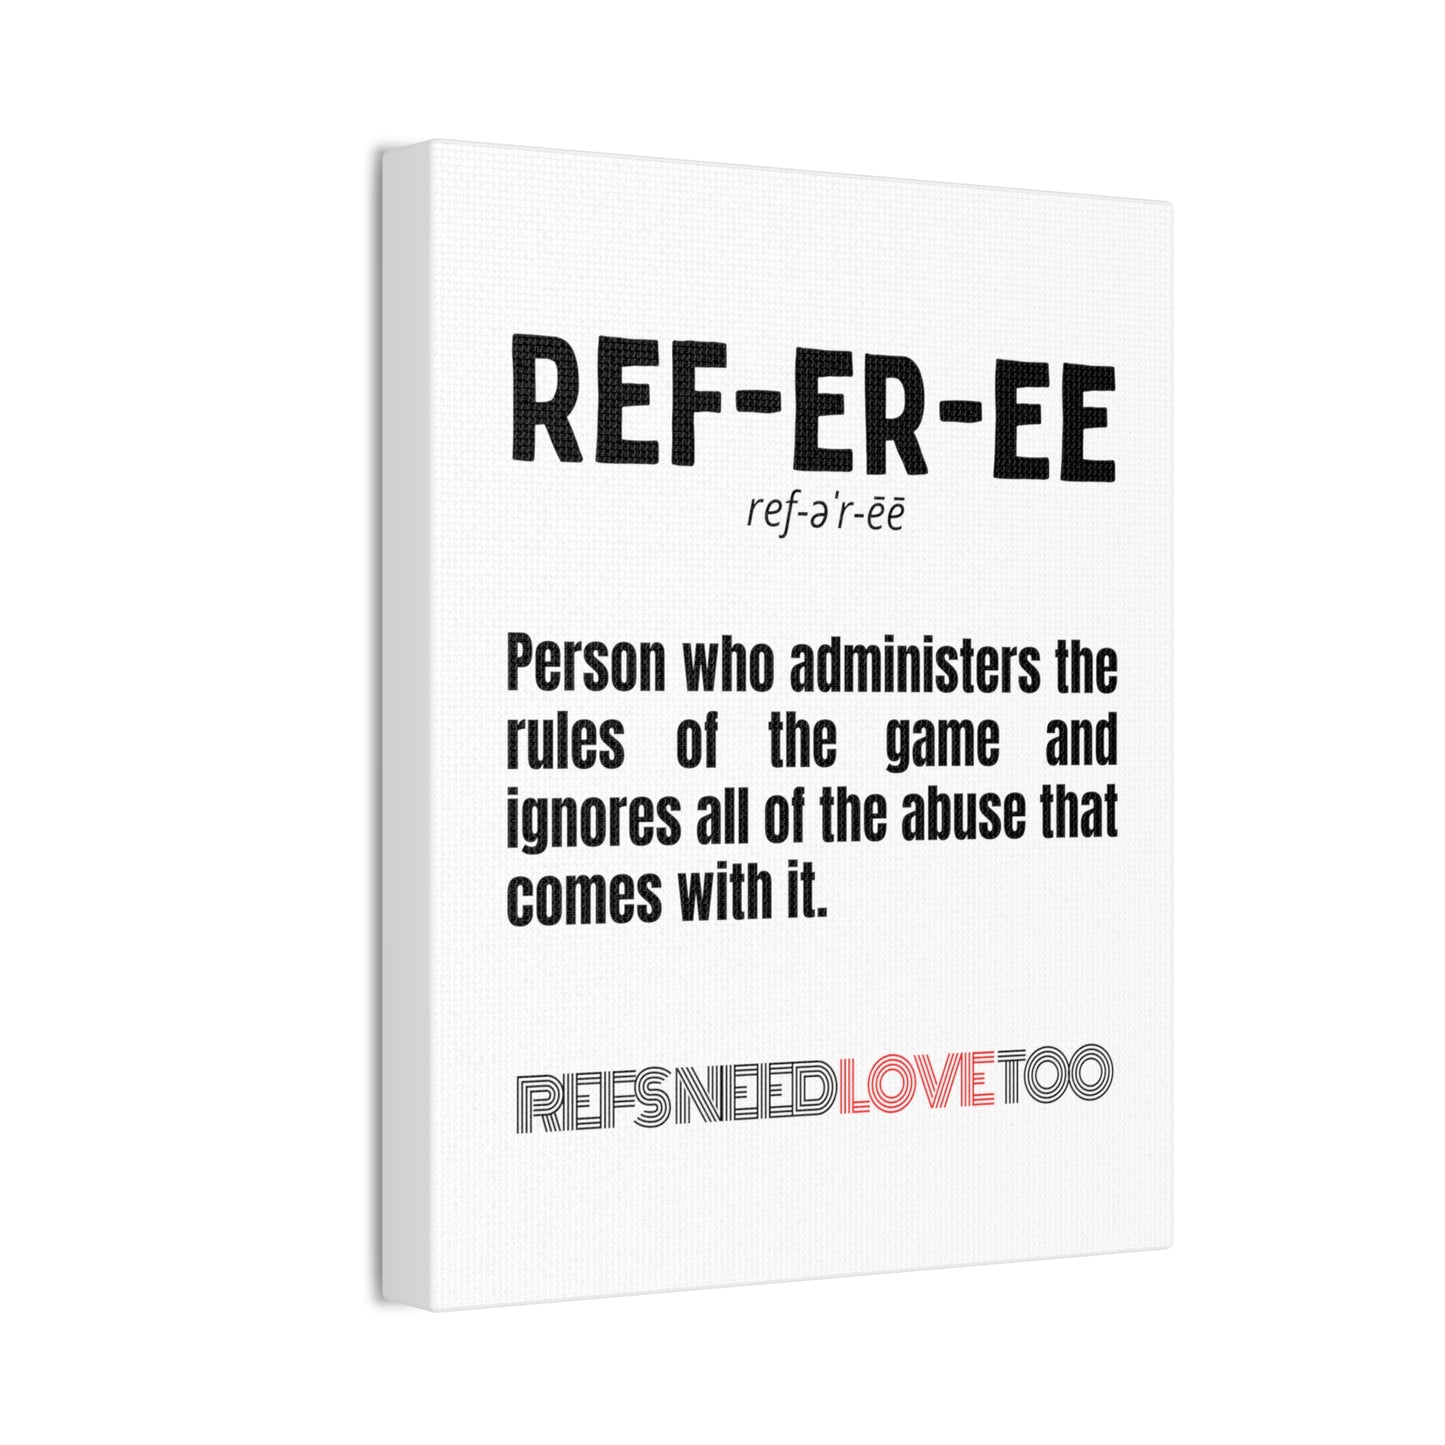 Referee Definition Stretched Canvas, 8" x 10" x0.75" | Referee Presents | Gifts for Refs | Refs Need Love too